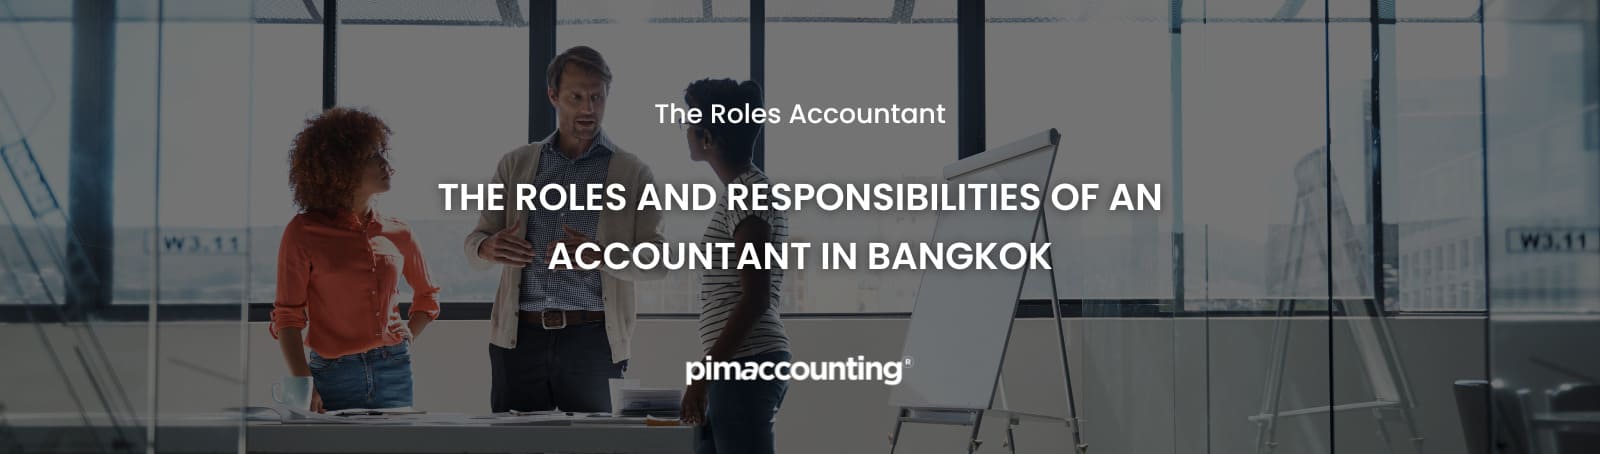 Role of Accountant - Pimaccouting